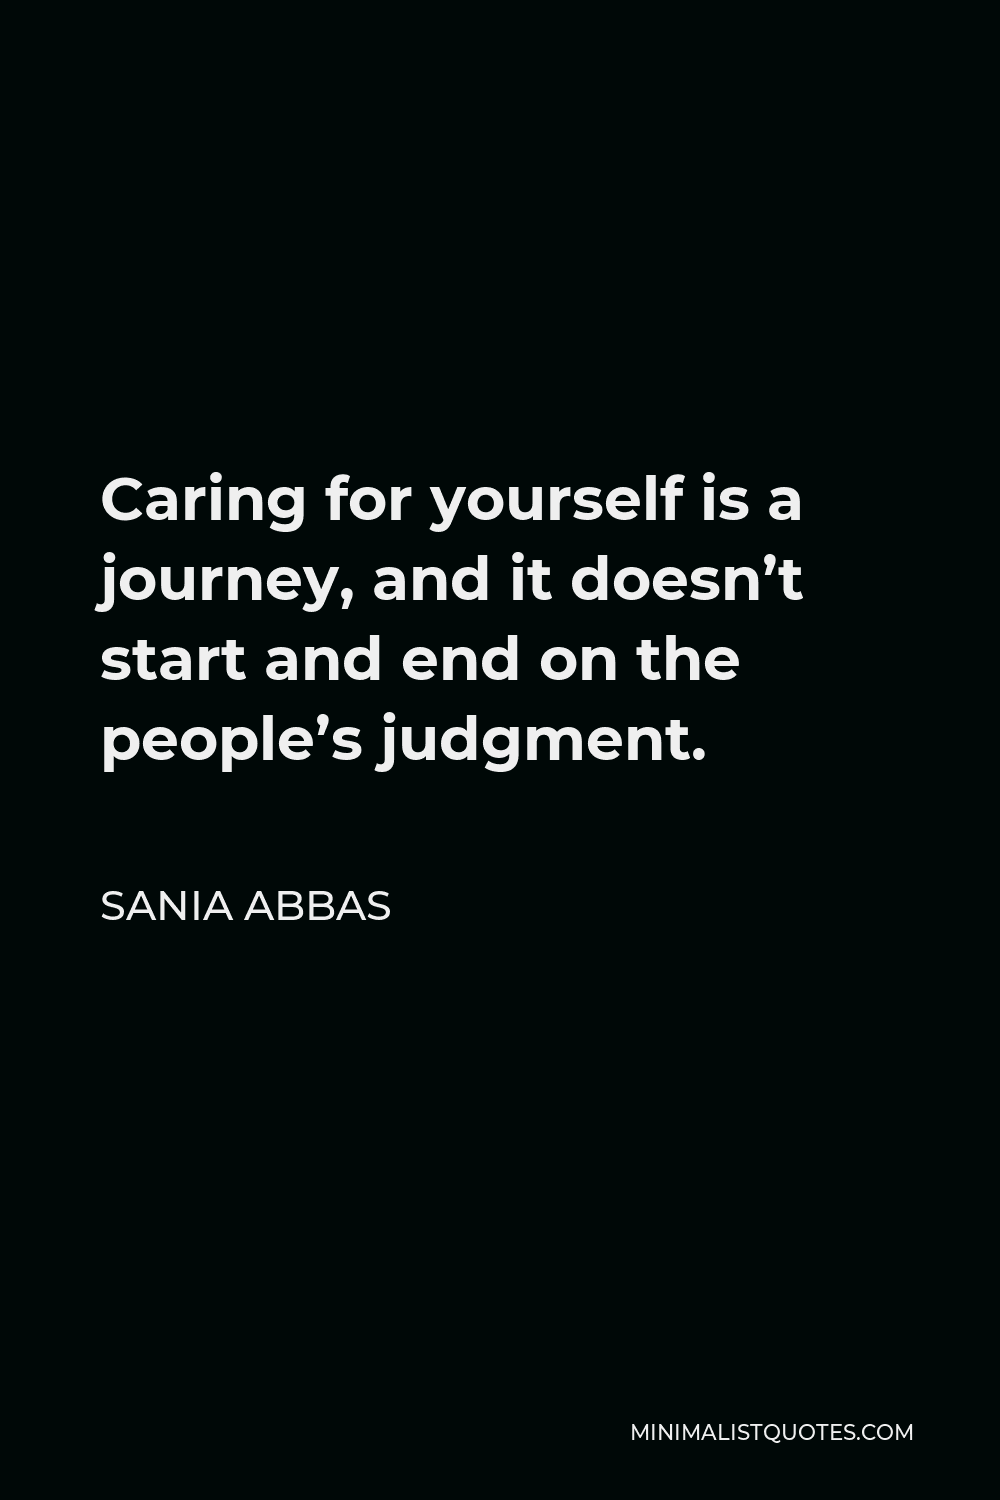 Sania Abbas Quote - Caring for yourself is a journey, and it doesn’t start and end on the people’s judgment.